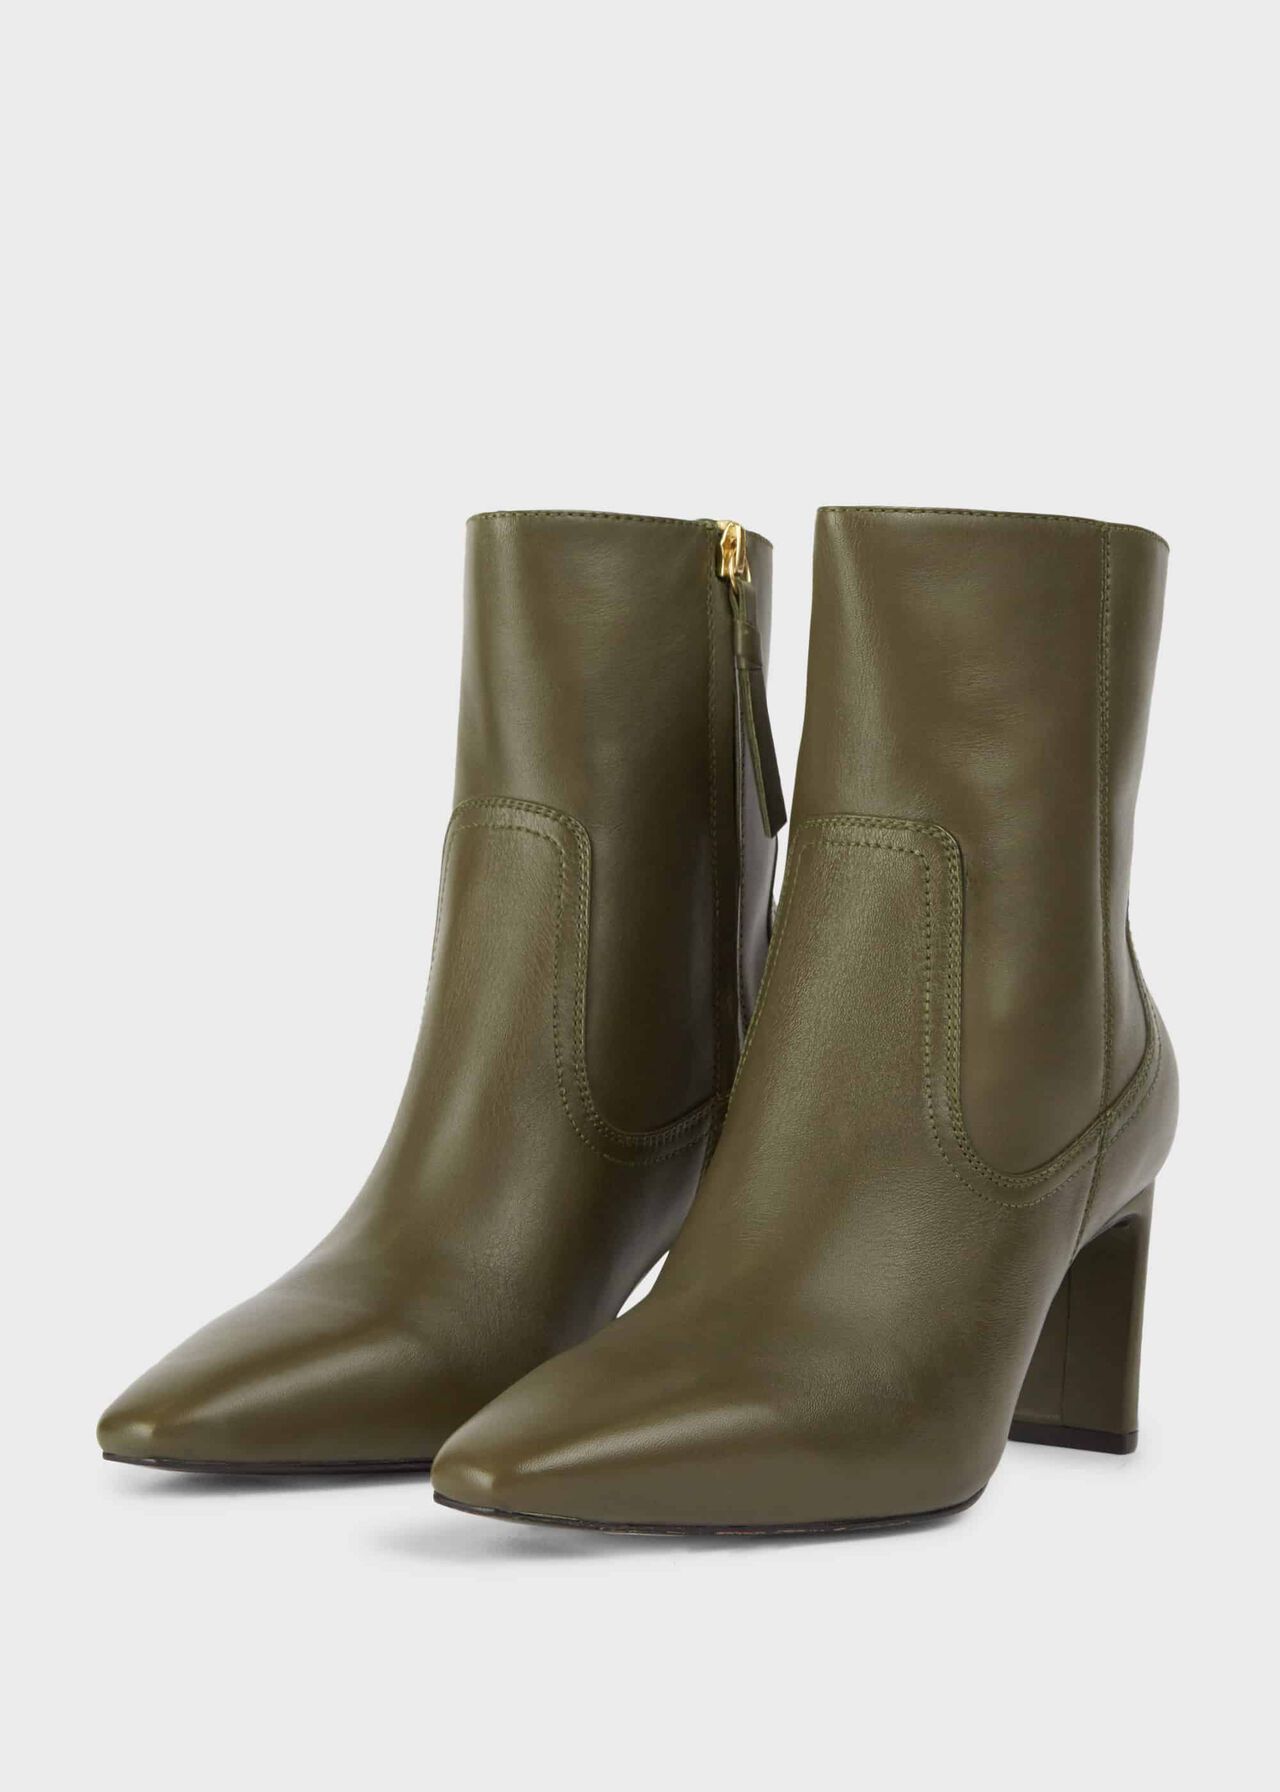 Fiona Leather Ankle Boots, Olive, hi-res